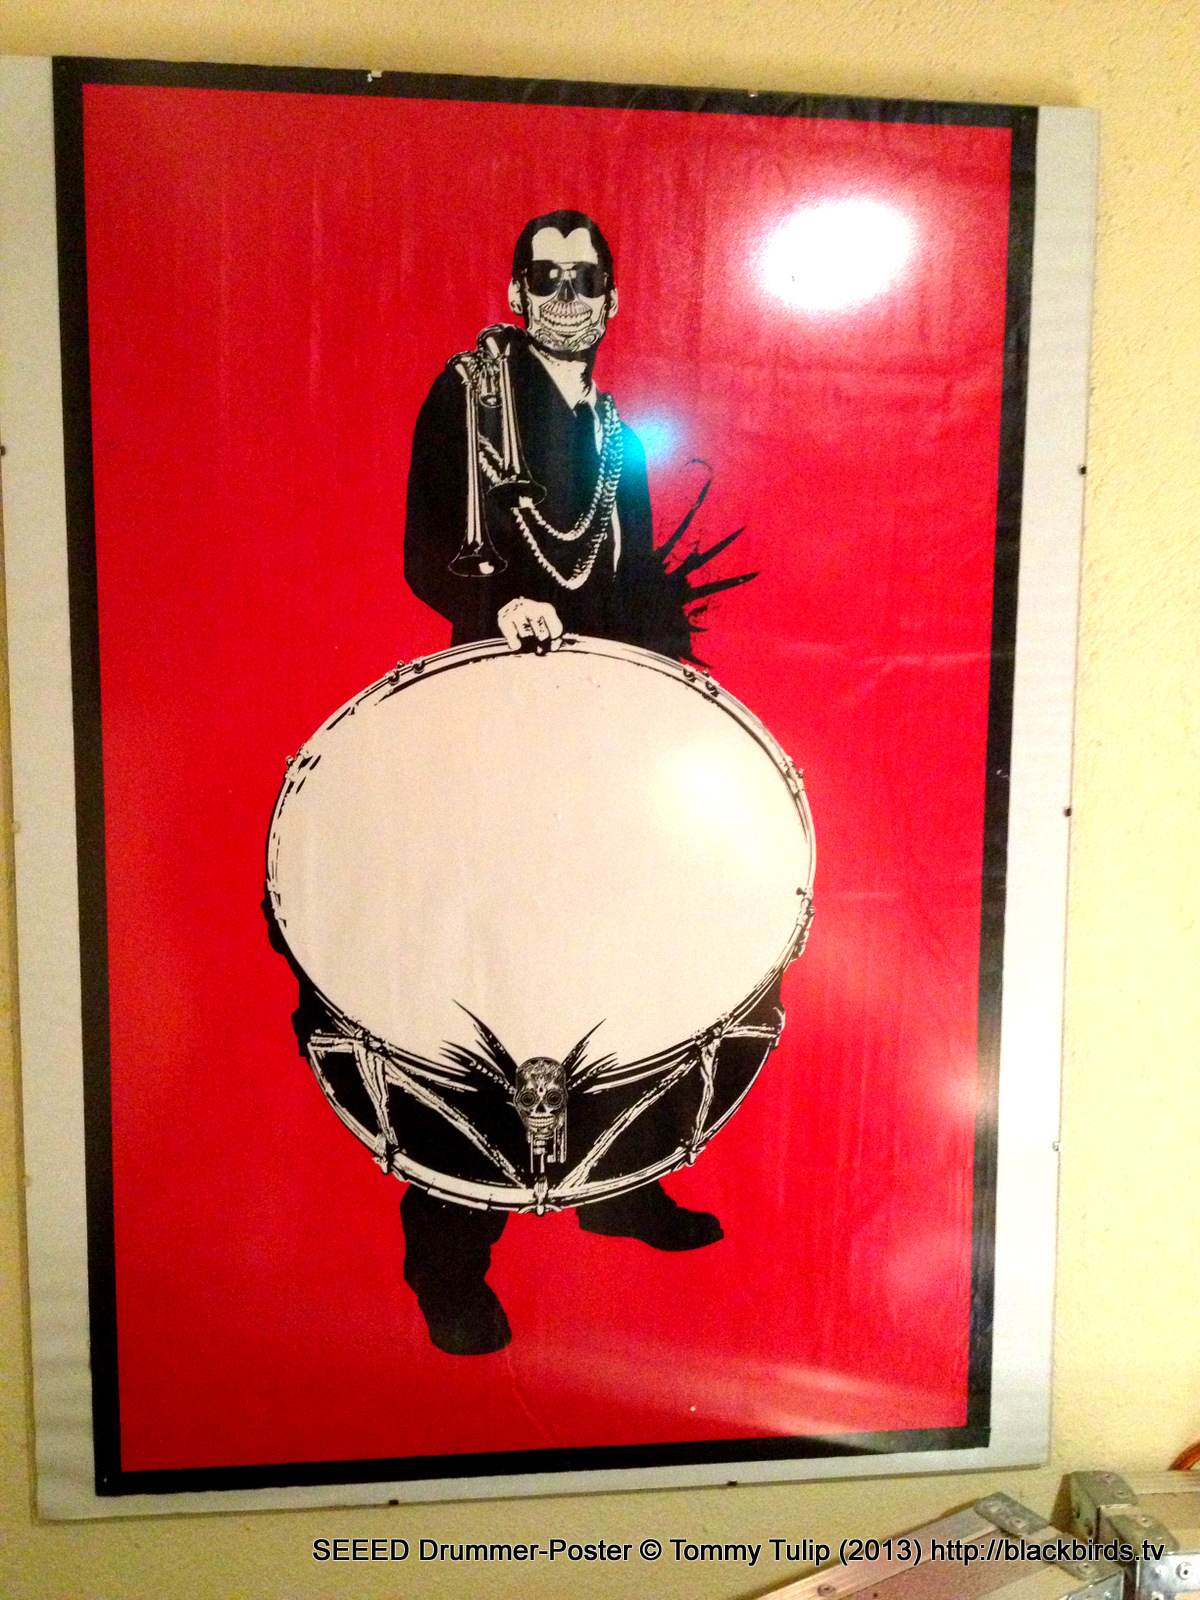 SEEED Drummer-Poster